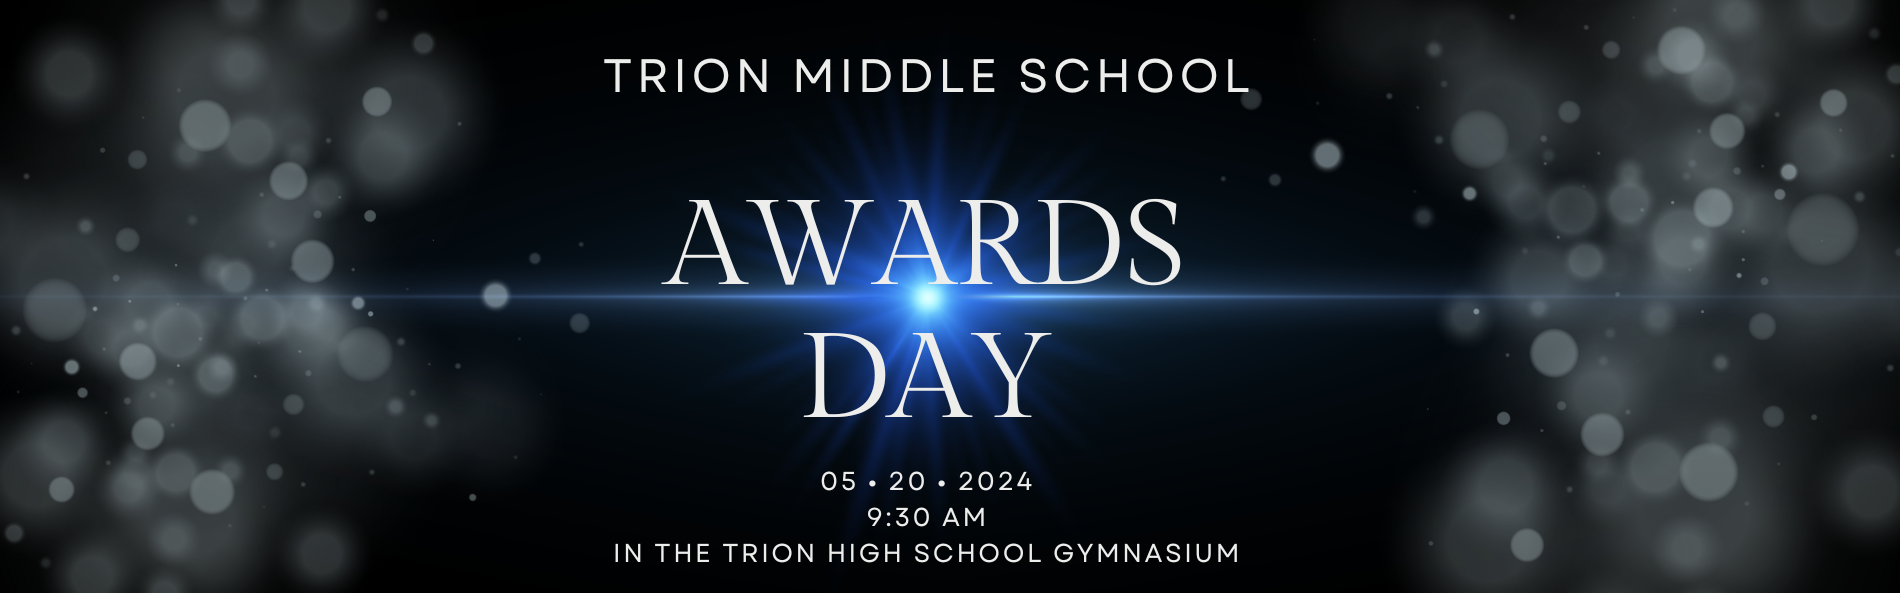 TMS Awards Day 5/20 @ 9:30 AM; students can leave following